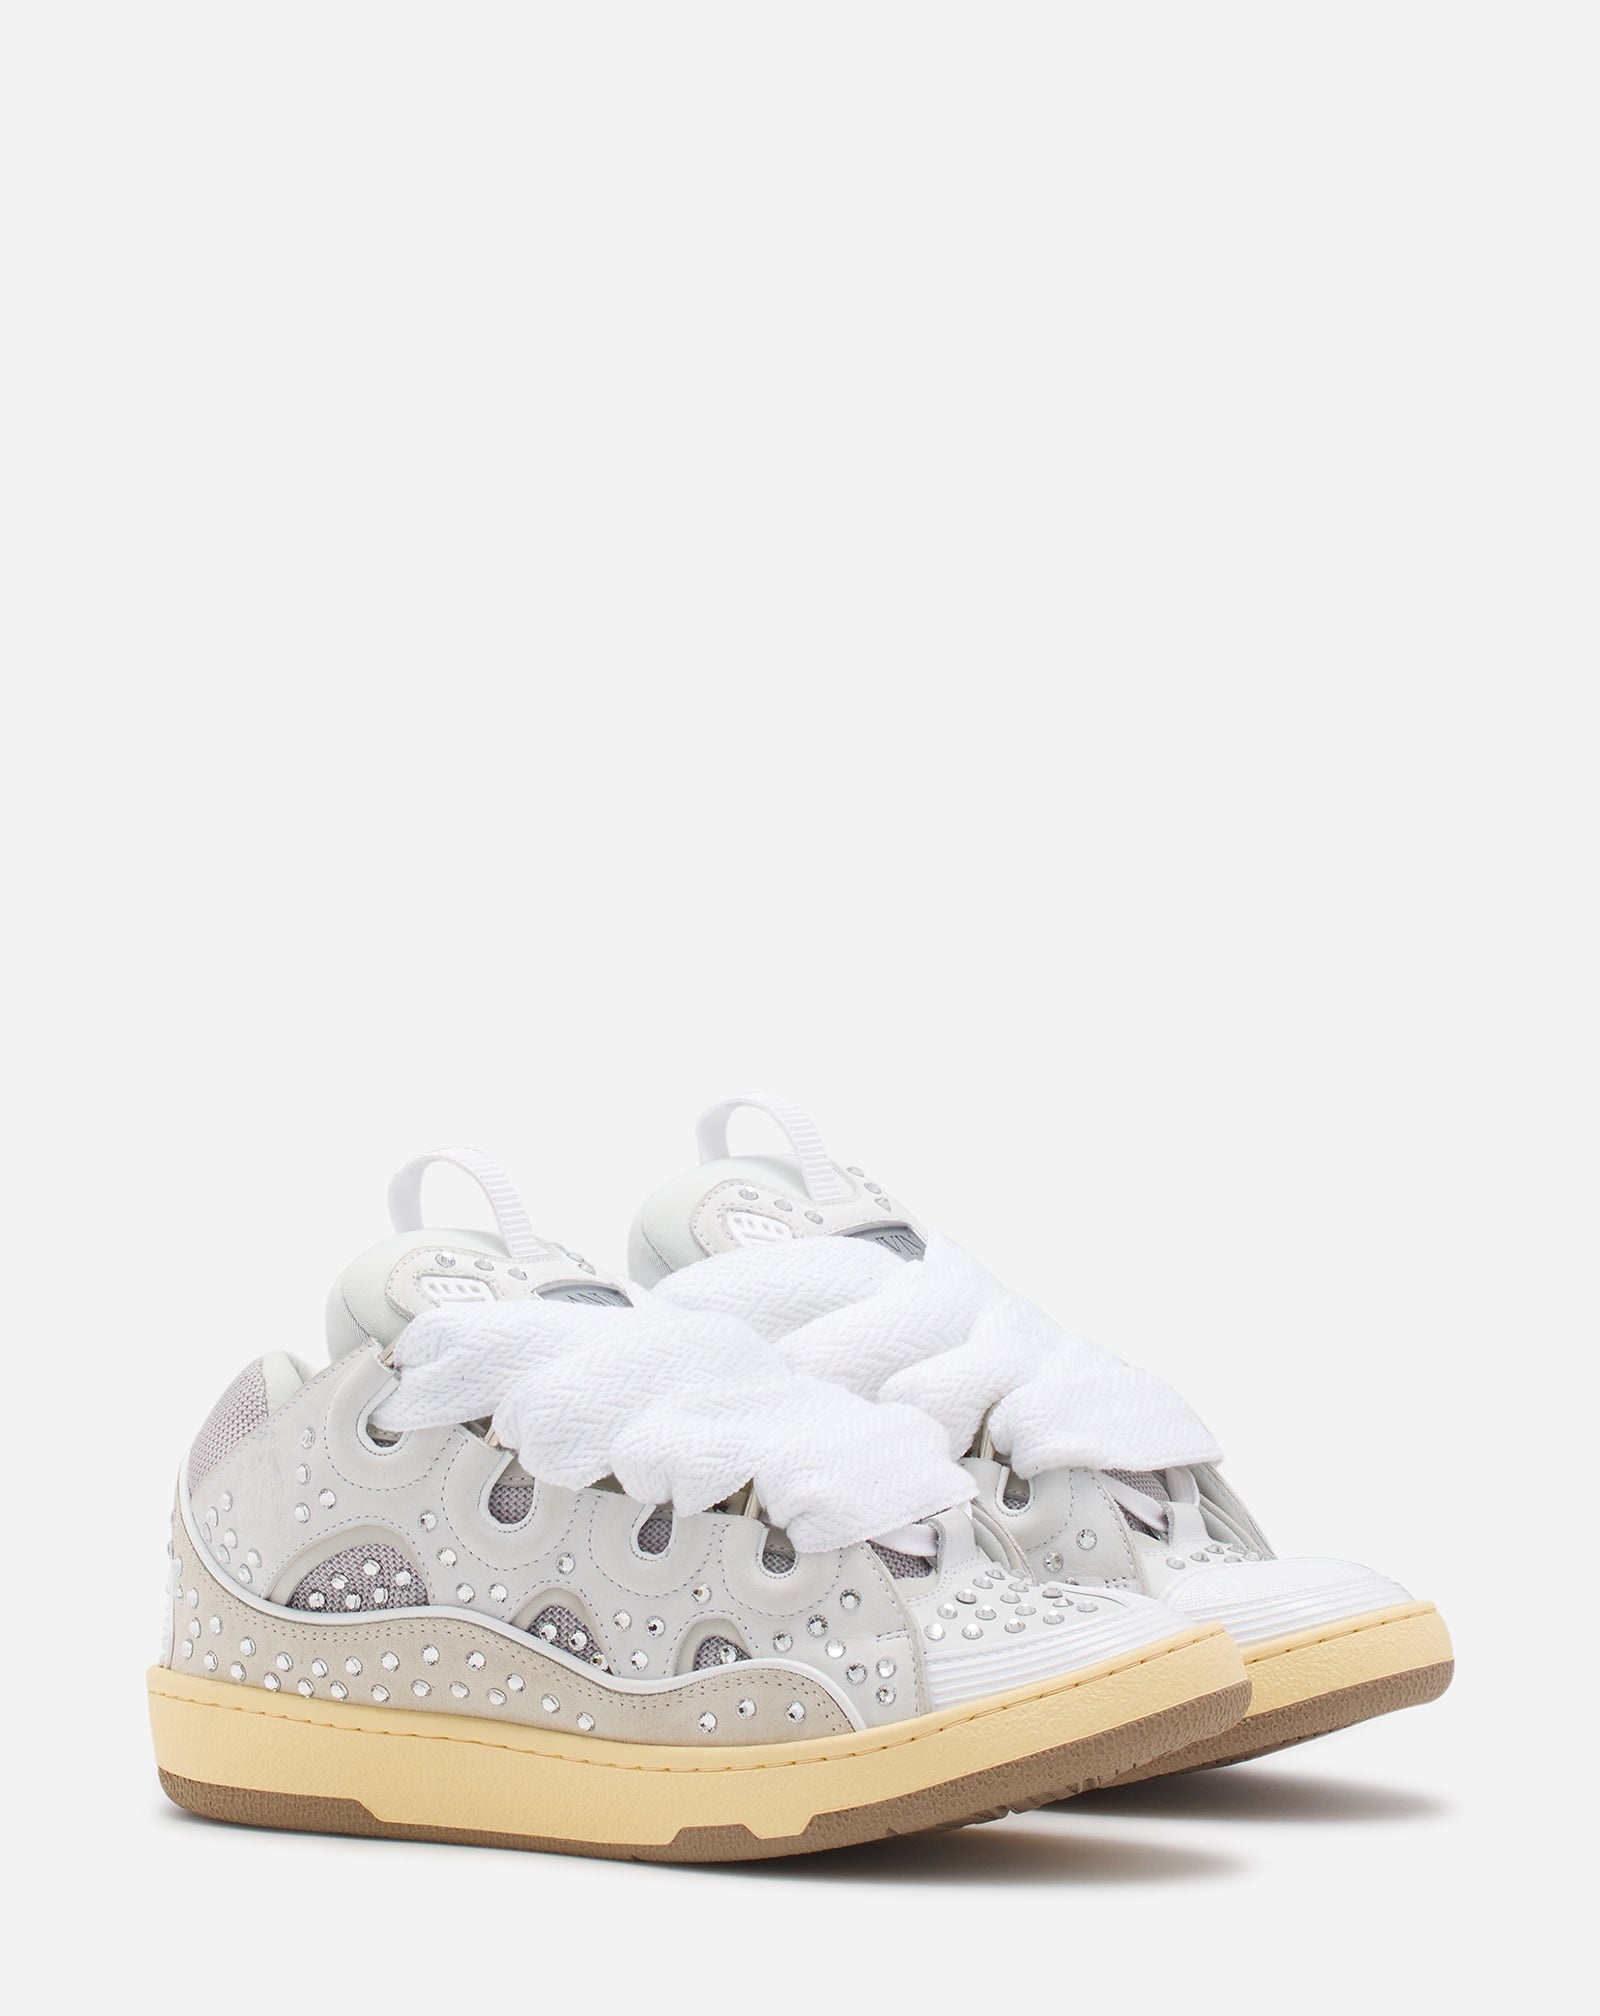 CURB LEATHER SNEAKERS WITH RHINESTONES - 2